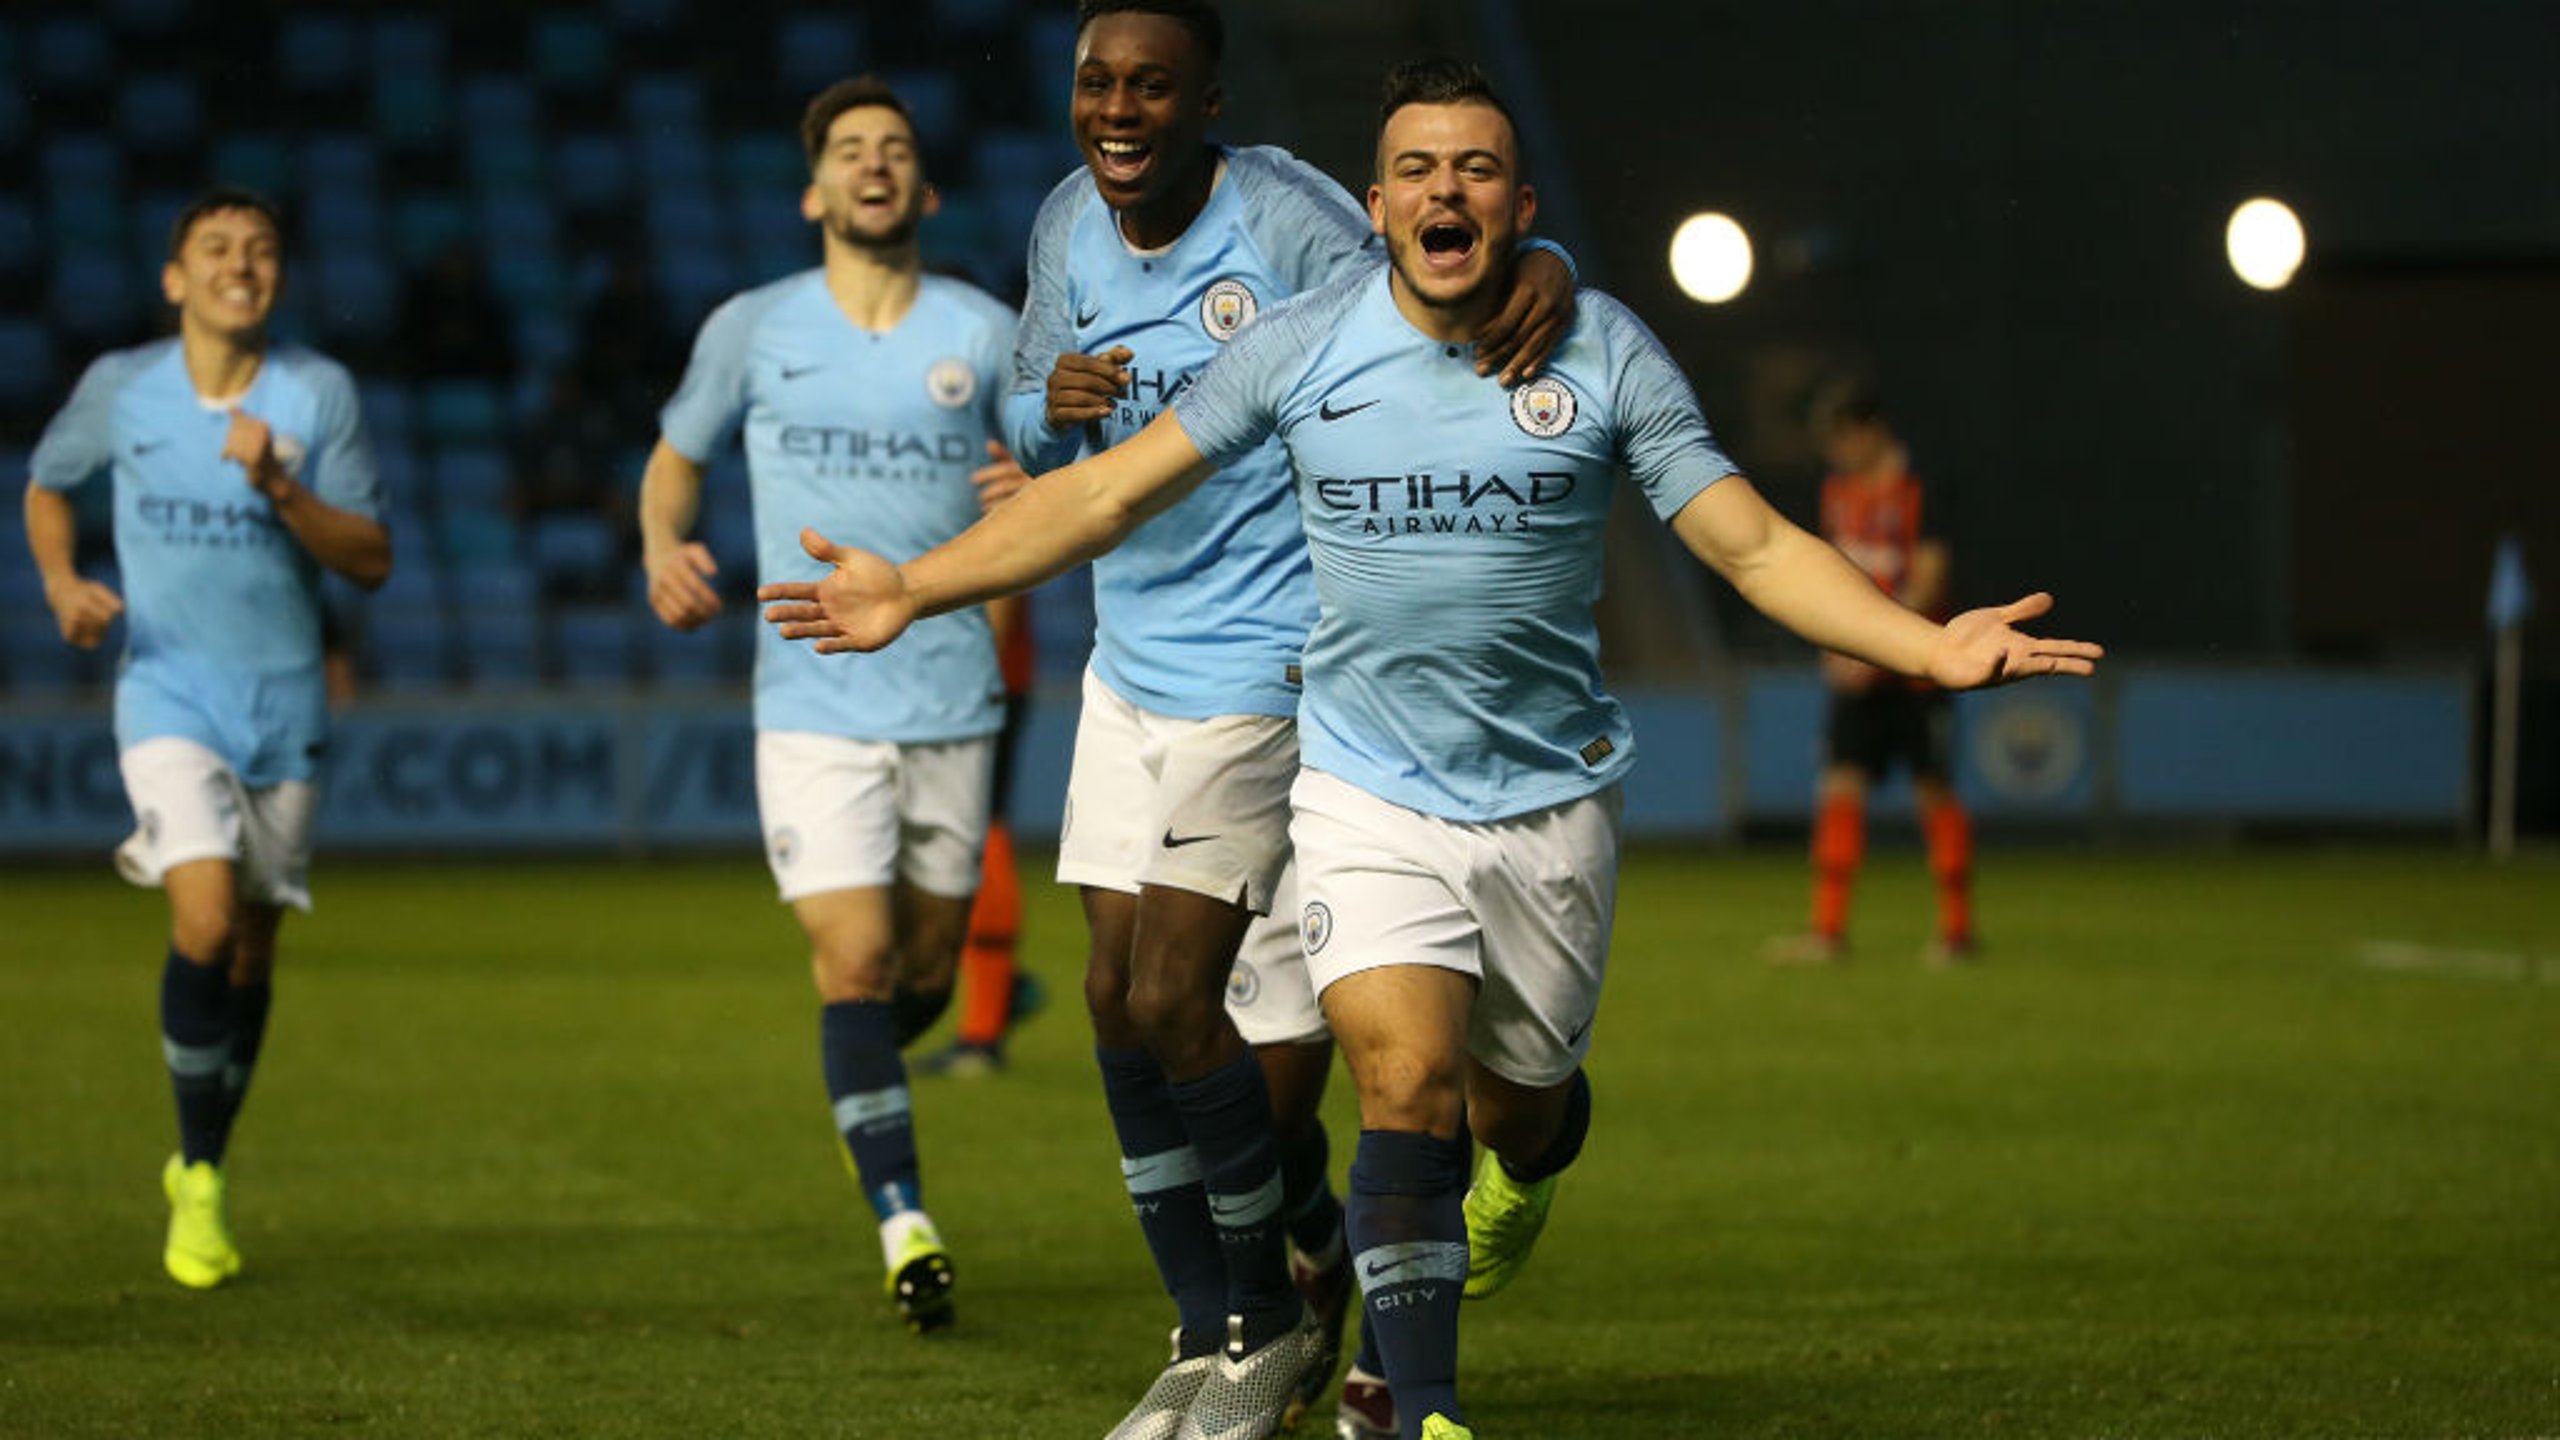 COMEBACK: City sealed their first Uefa Youth League win